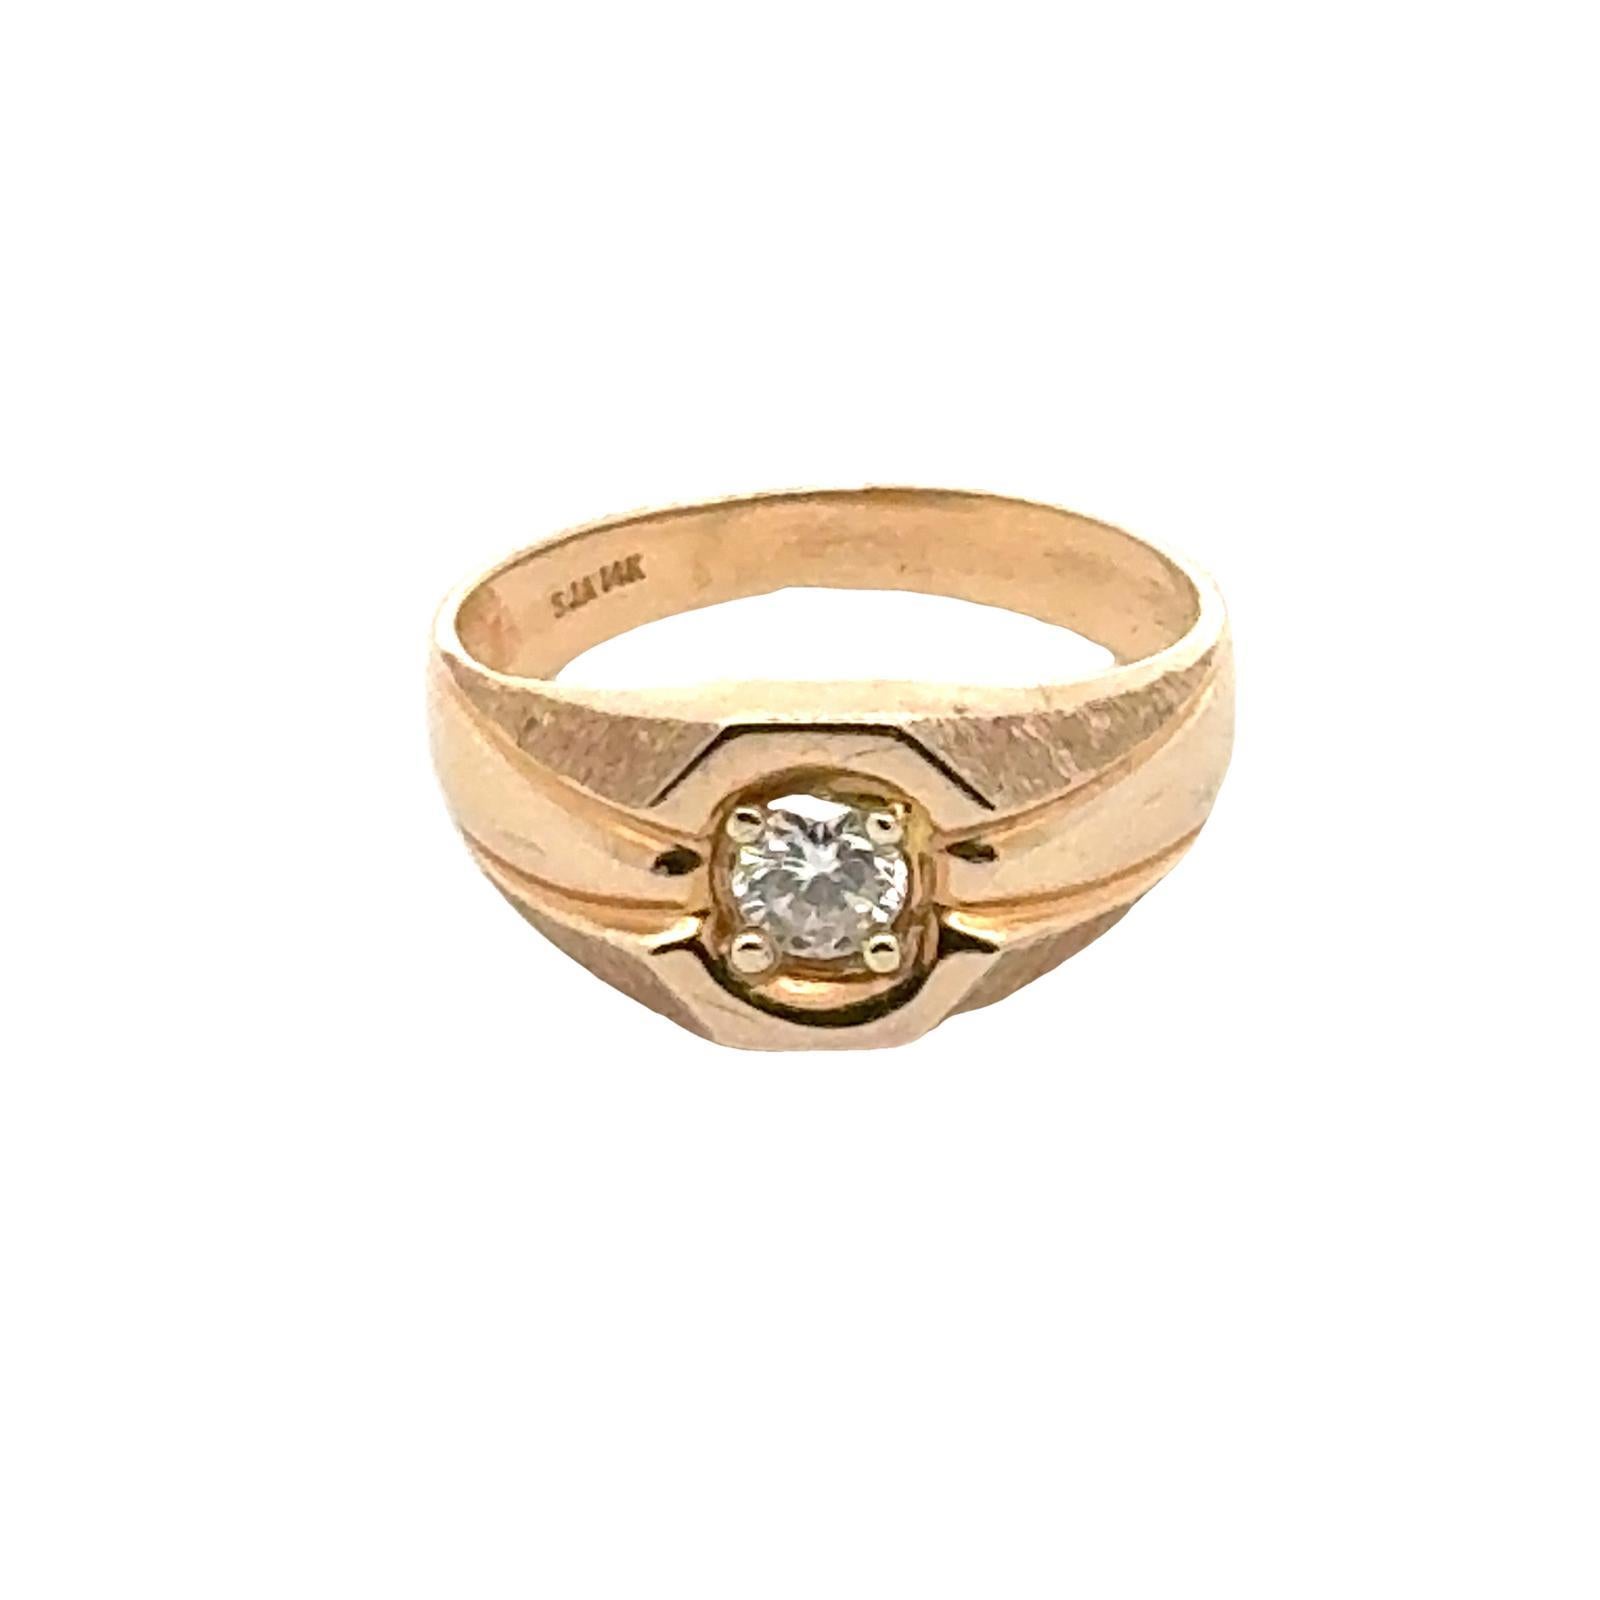 This vintage men's ring is a testament to timeless style and sophistication. Crafted from 14 karat yellow gold, the ring features an approximate .34 carat round brilliant cut diamond graded I color and SI1 clarity. The diamond is securely set in a